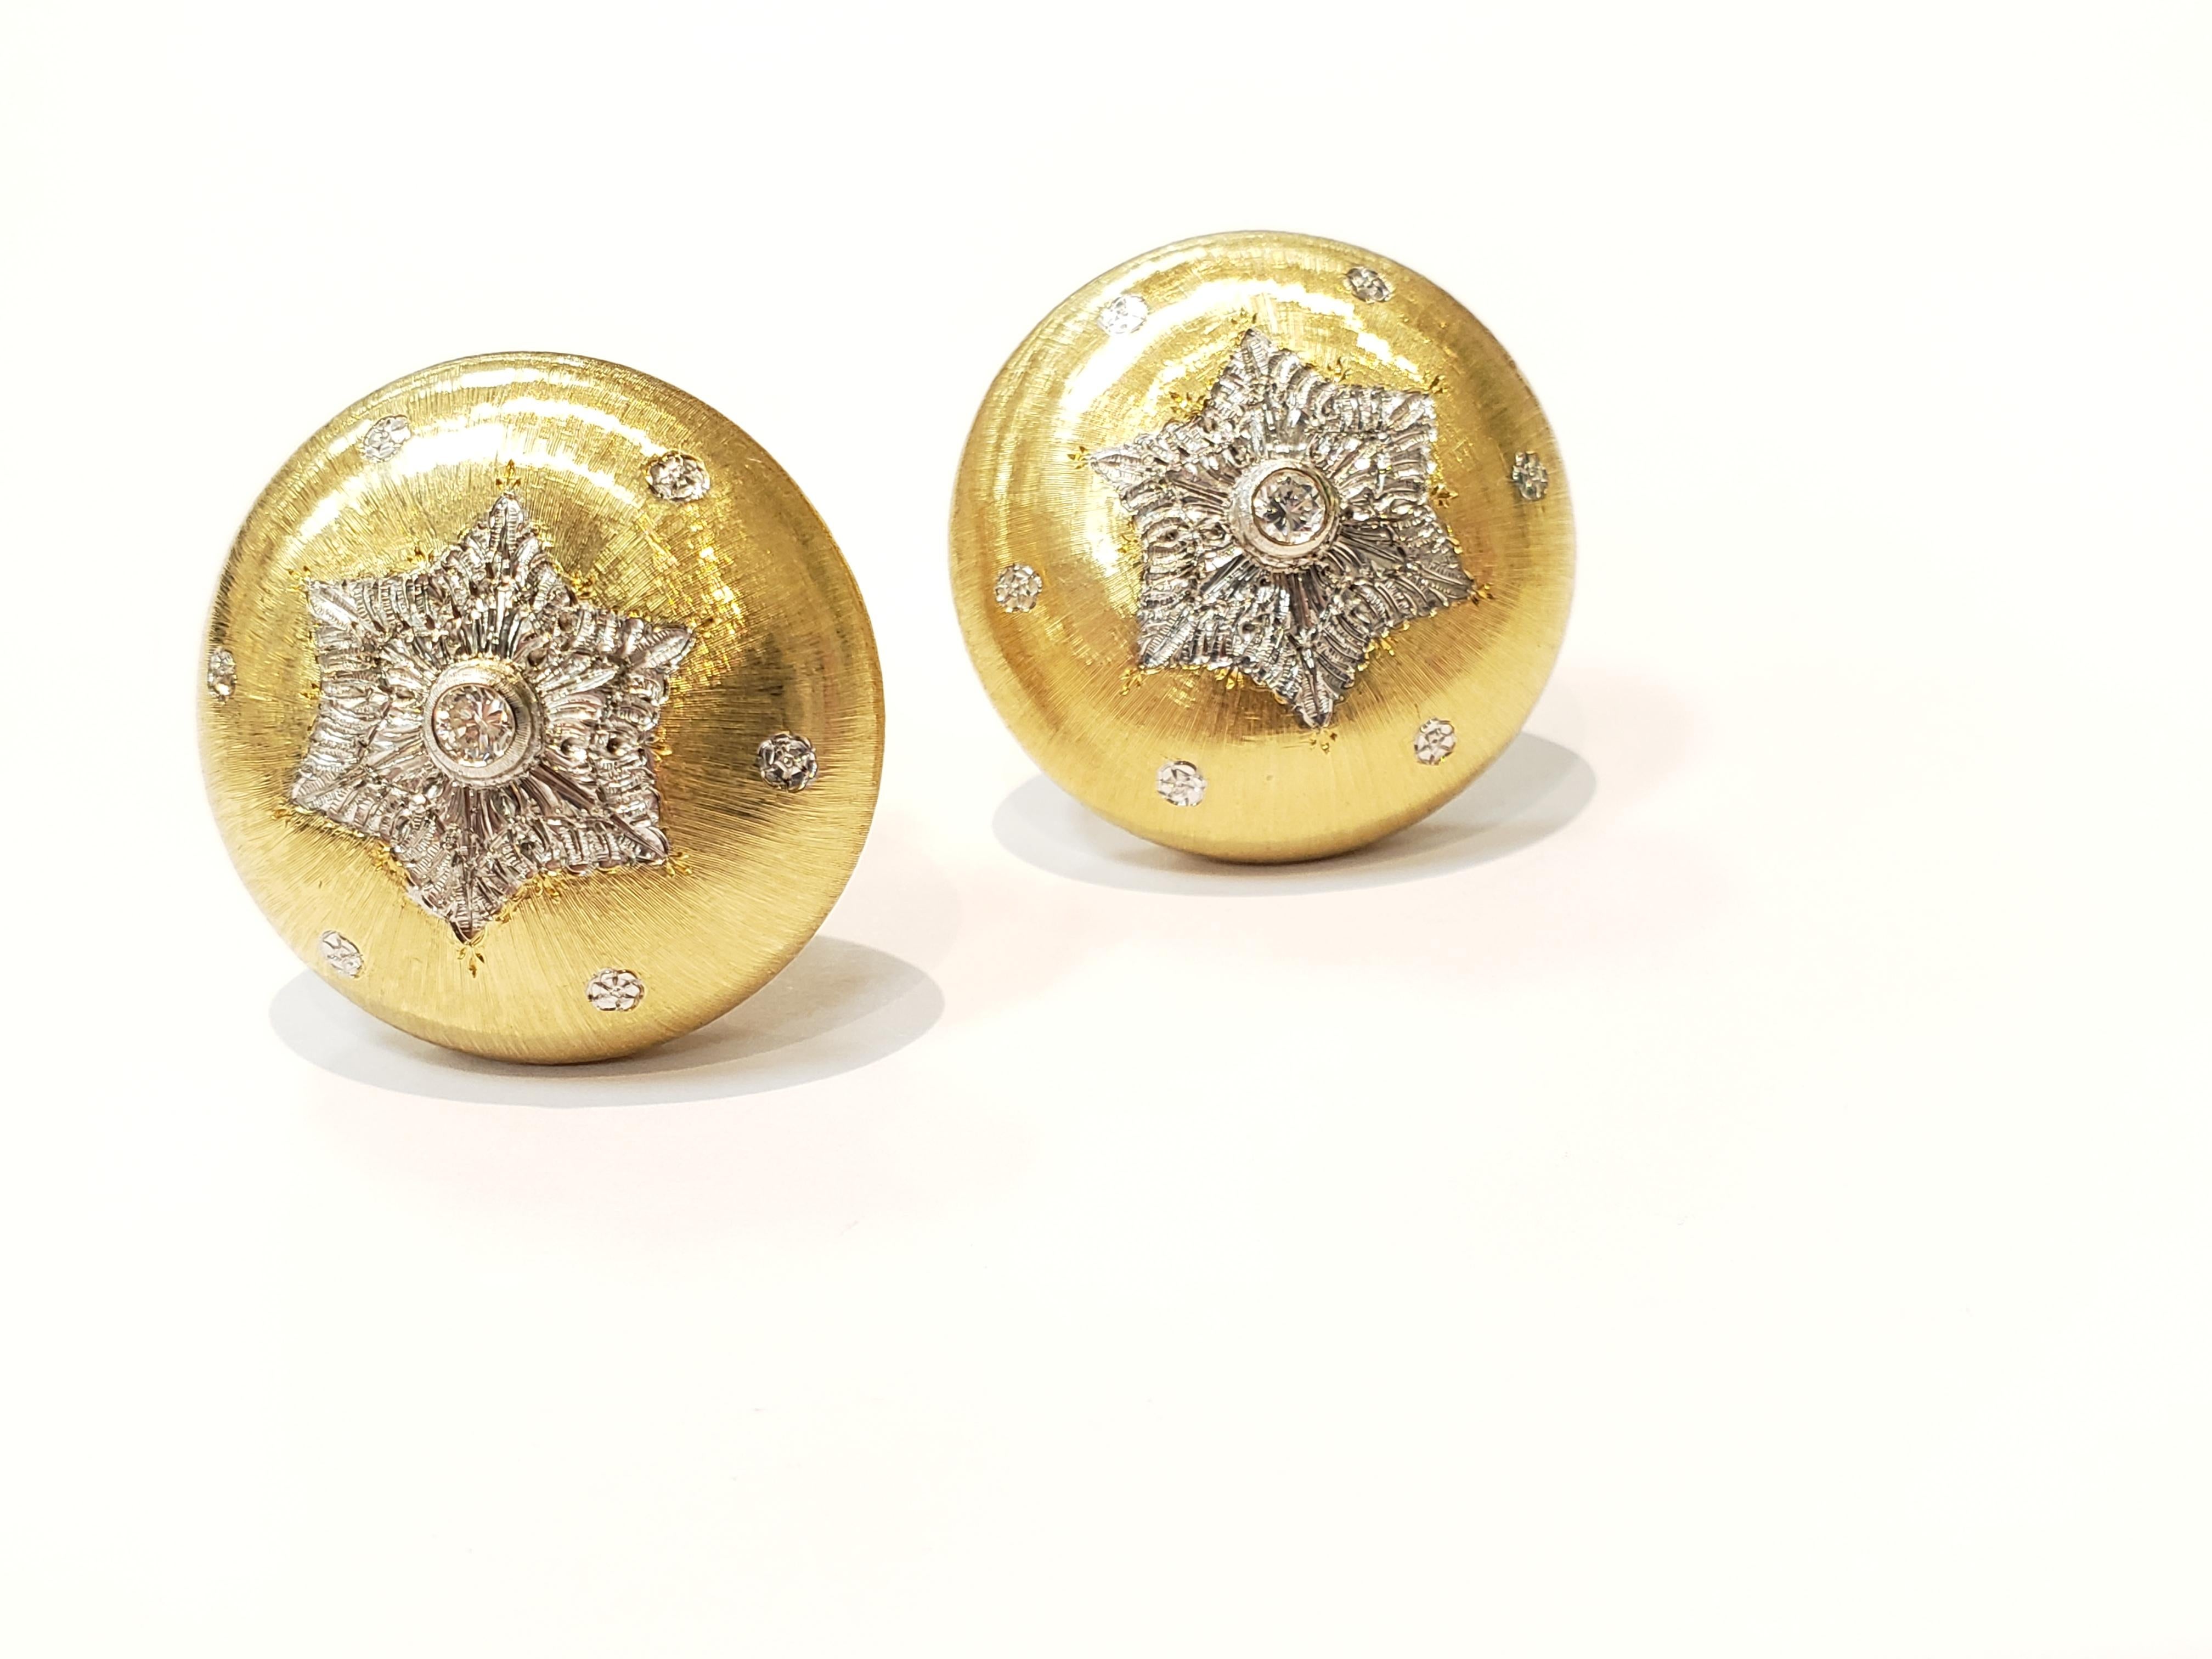 Contemporary 18 Karat Yellow Gold Earrings with Engraved Snowflake Design and Diamond Centers For Sale